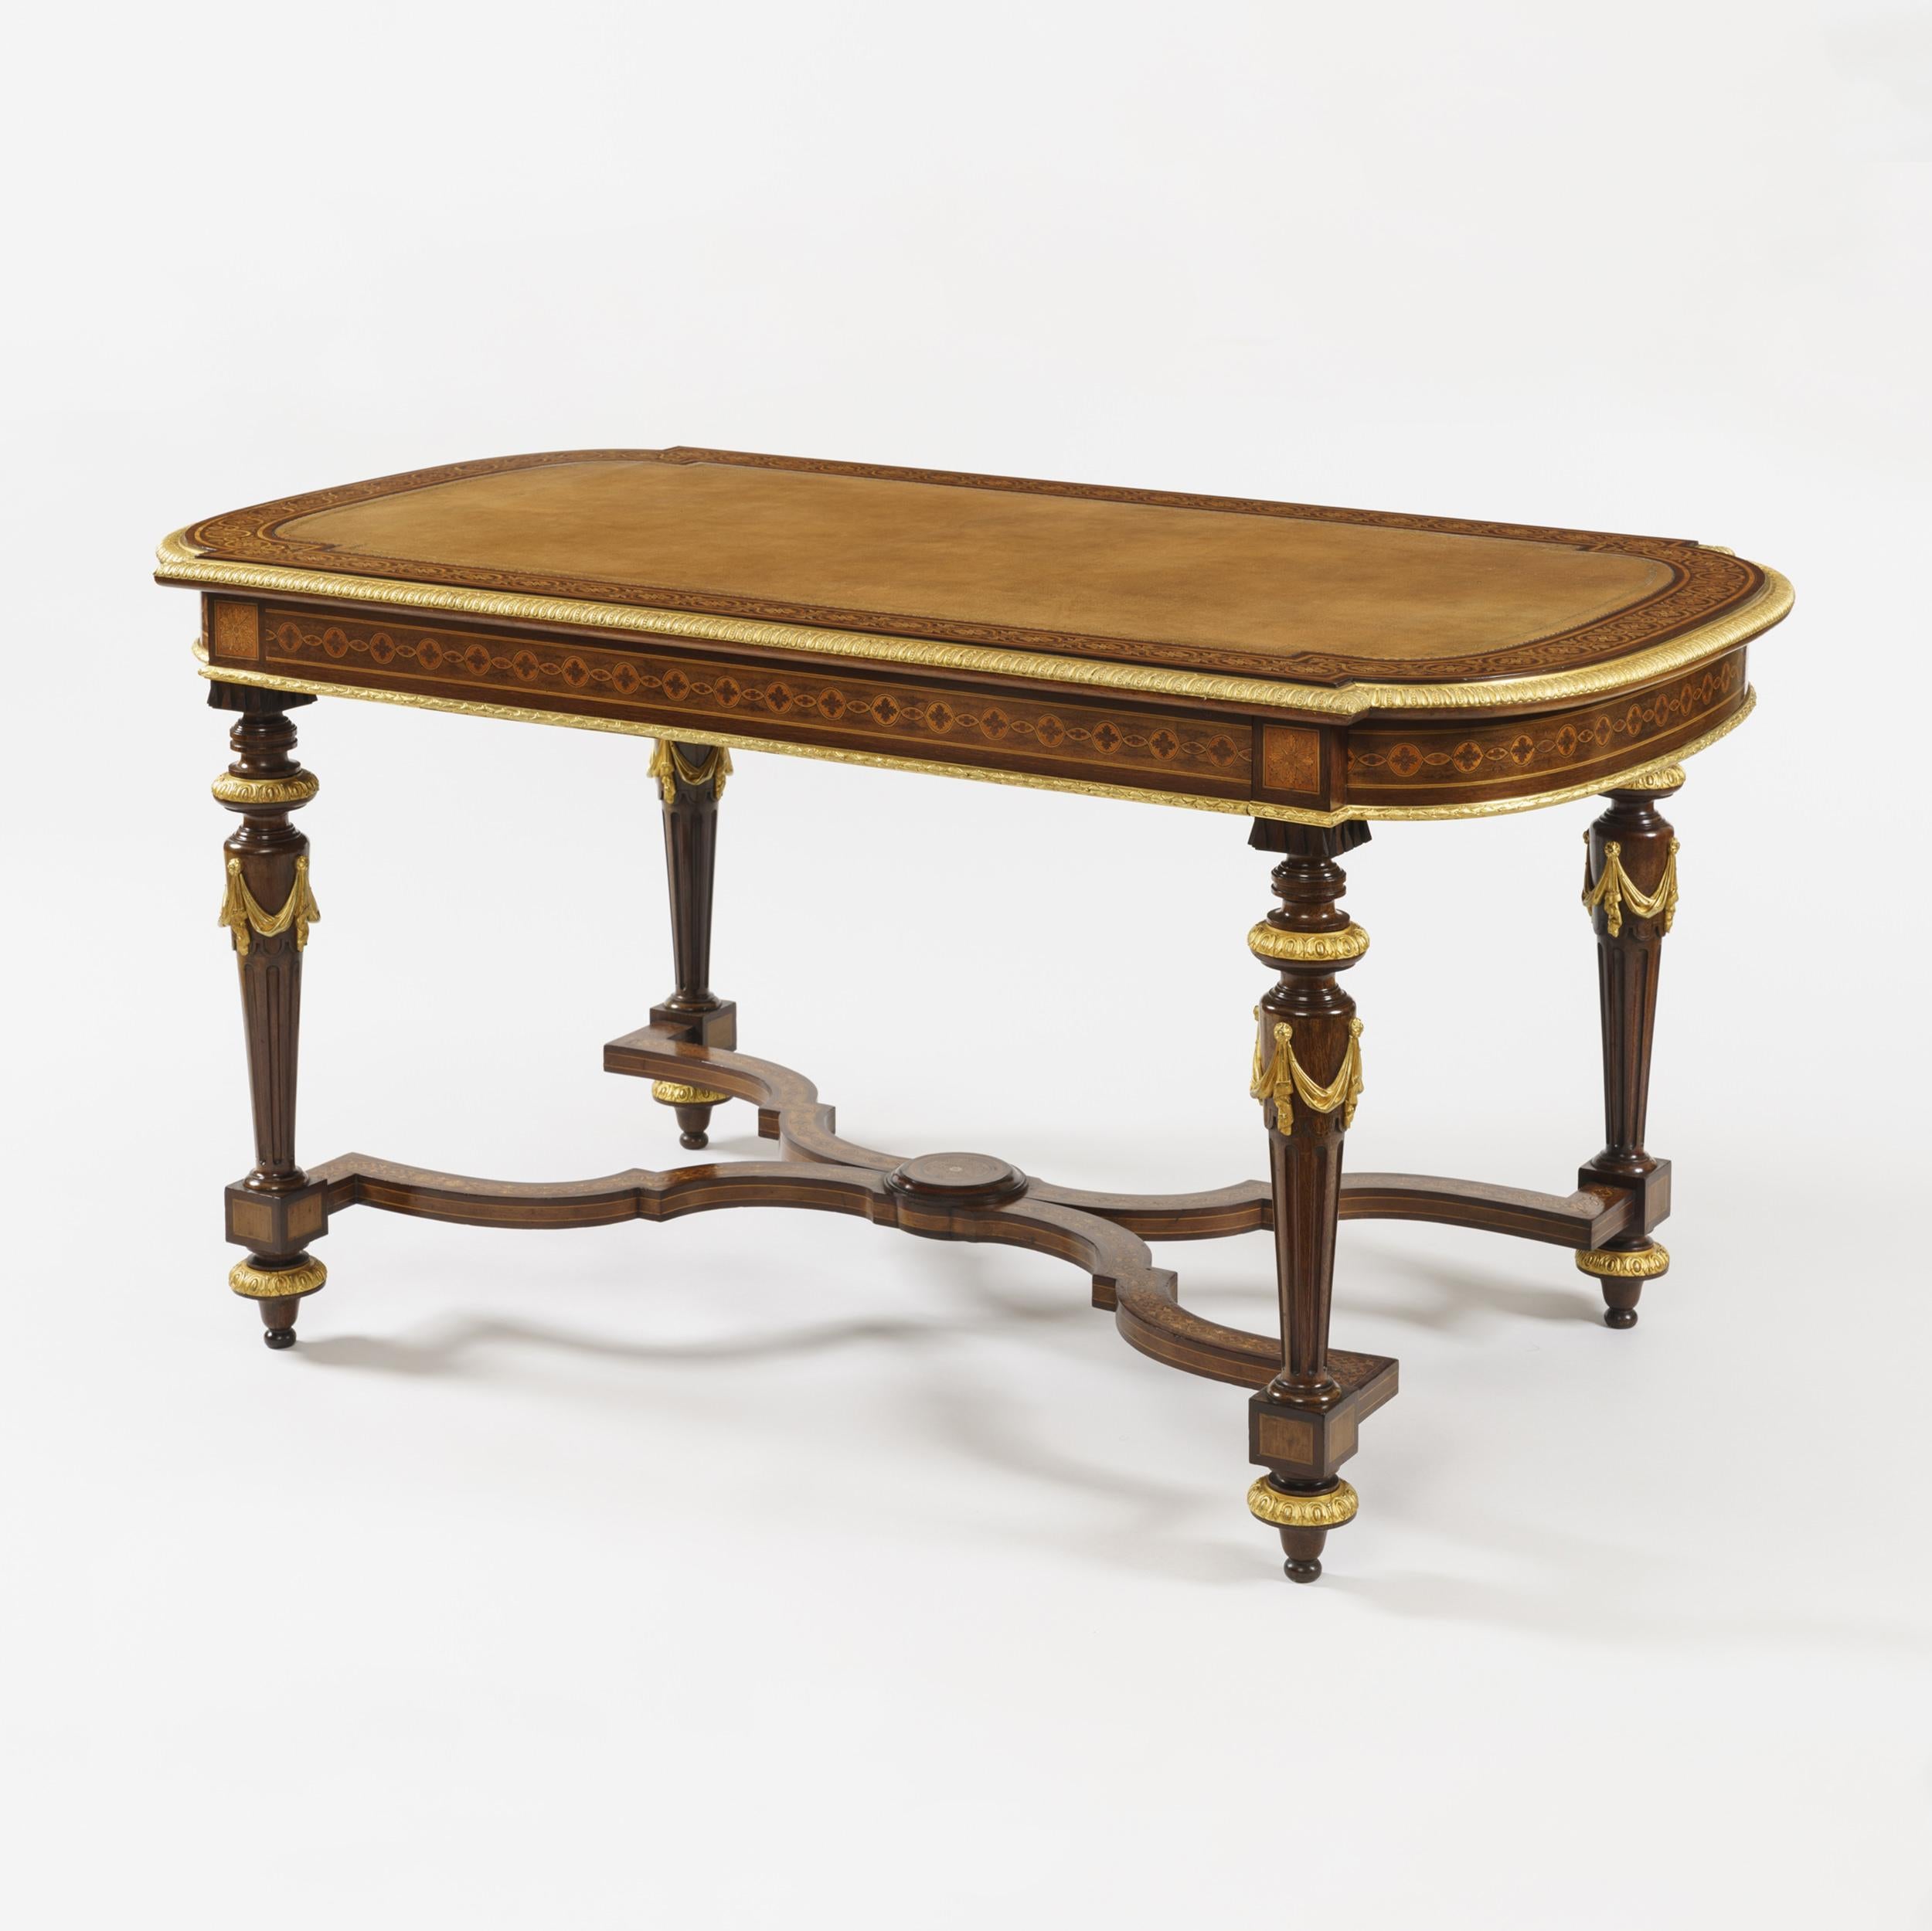 A good writing table in the Manner of Holland & Sons

Constructed in mahogany, with specimen wood inlays, and gilt bronze mounts; of rectangular form, with bowed ends, rising from ring turned, fluted and tapering legs, adorned with bronze swags and